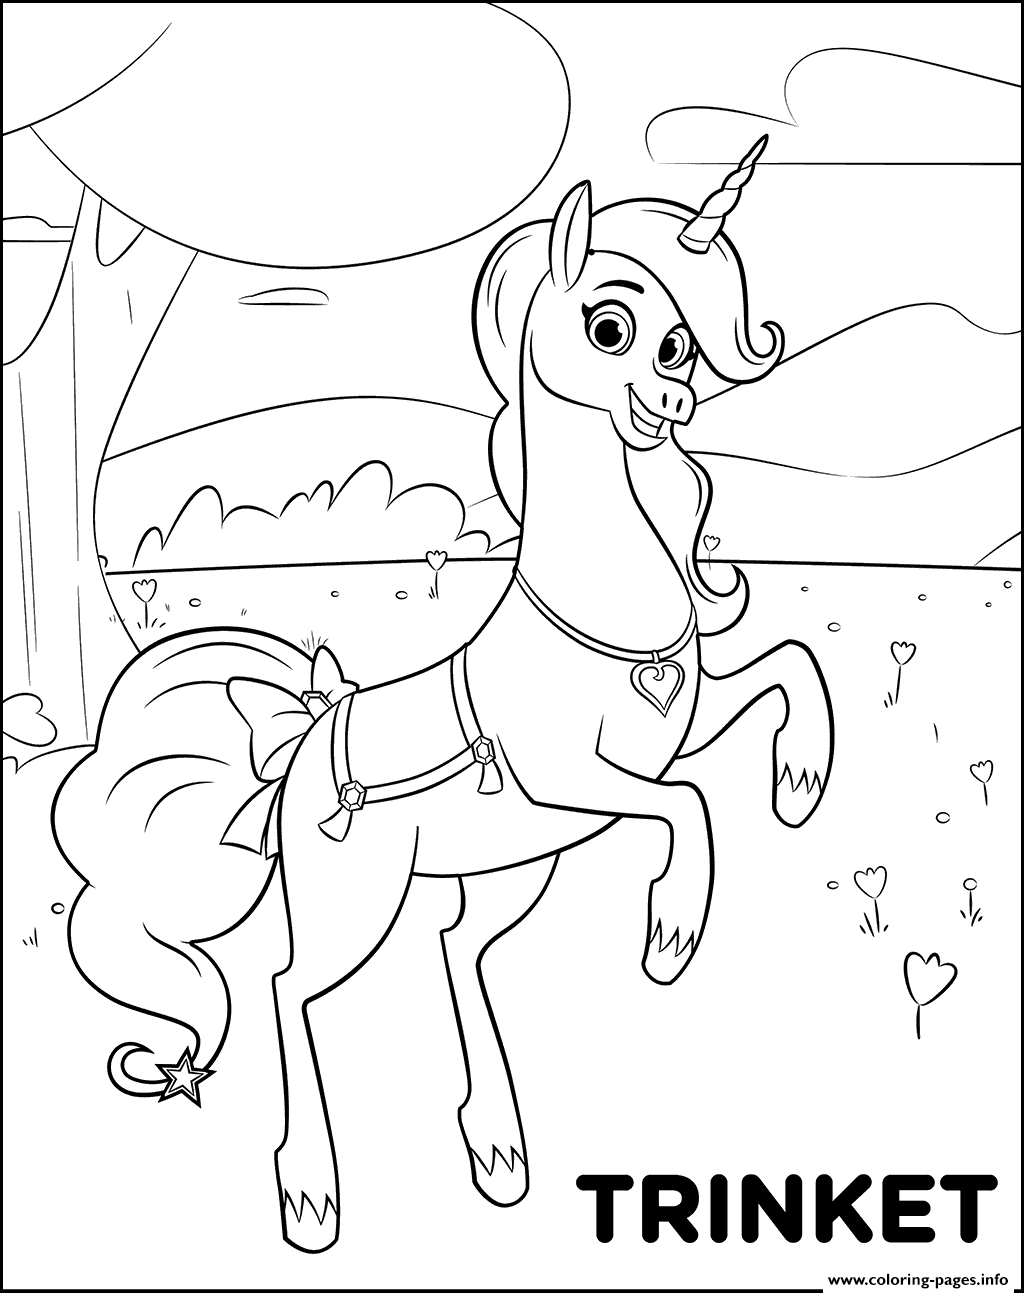 Magical Pet Unicorn Trinket For Girls Coloring Pages Printable